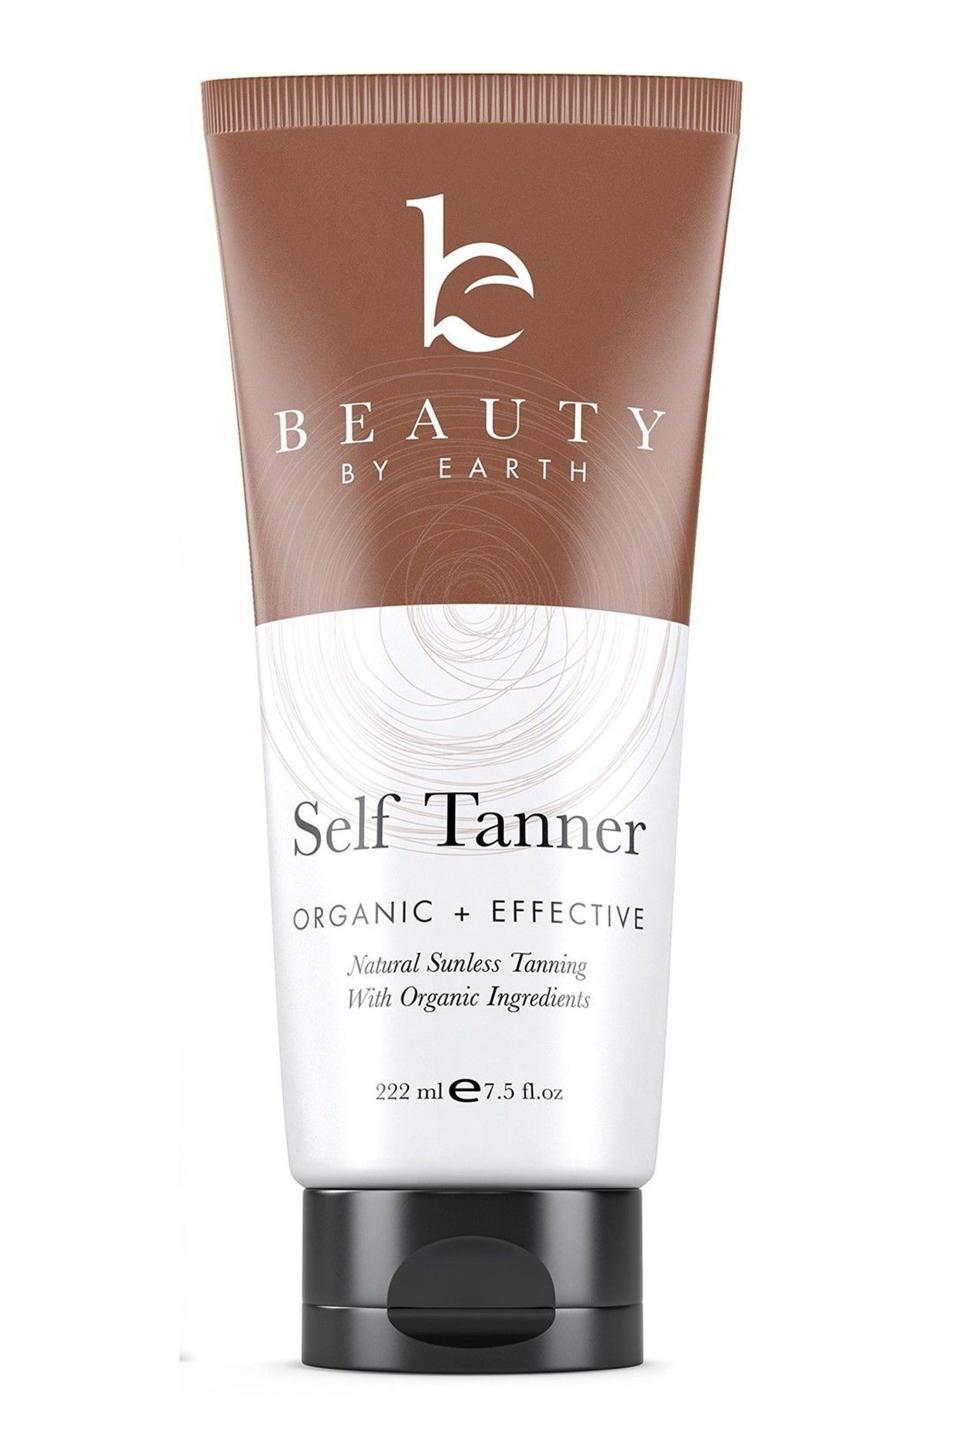 4) Beauty by Earth Self Tanner